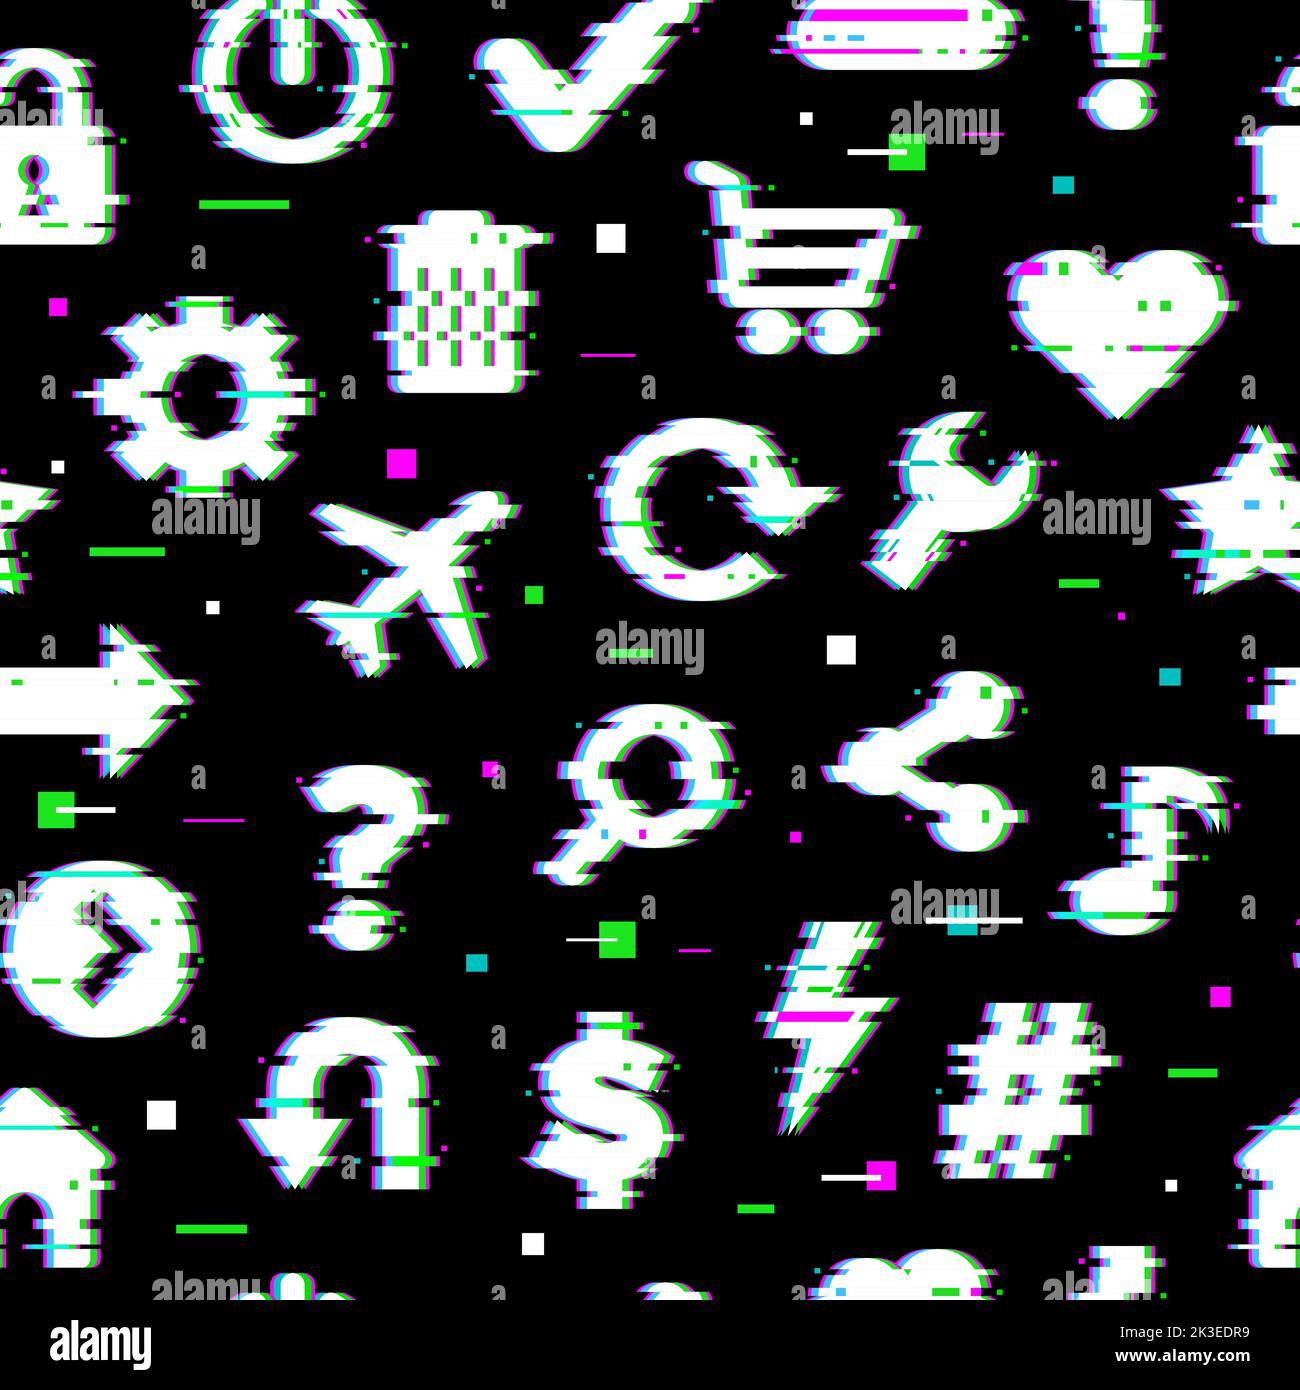 Glitched pattern. Media symbols arrows signs for web ui grunge design projects recent vector seamless stylized background Stock Vector